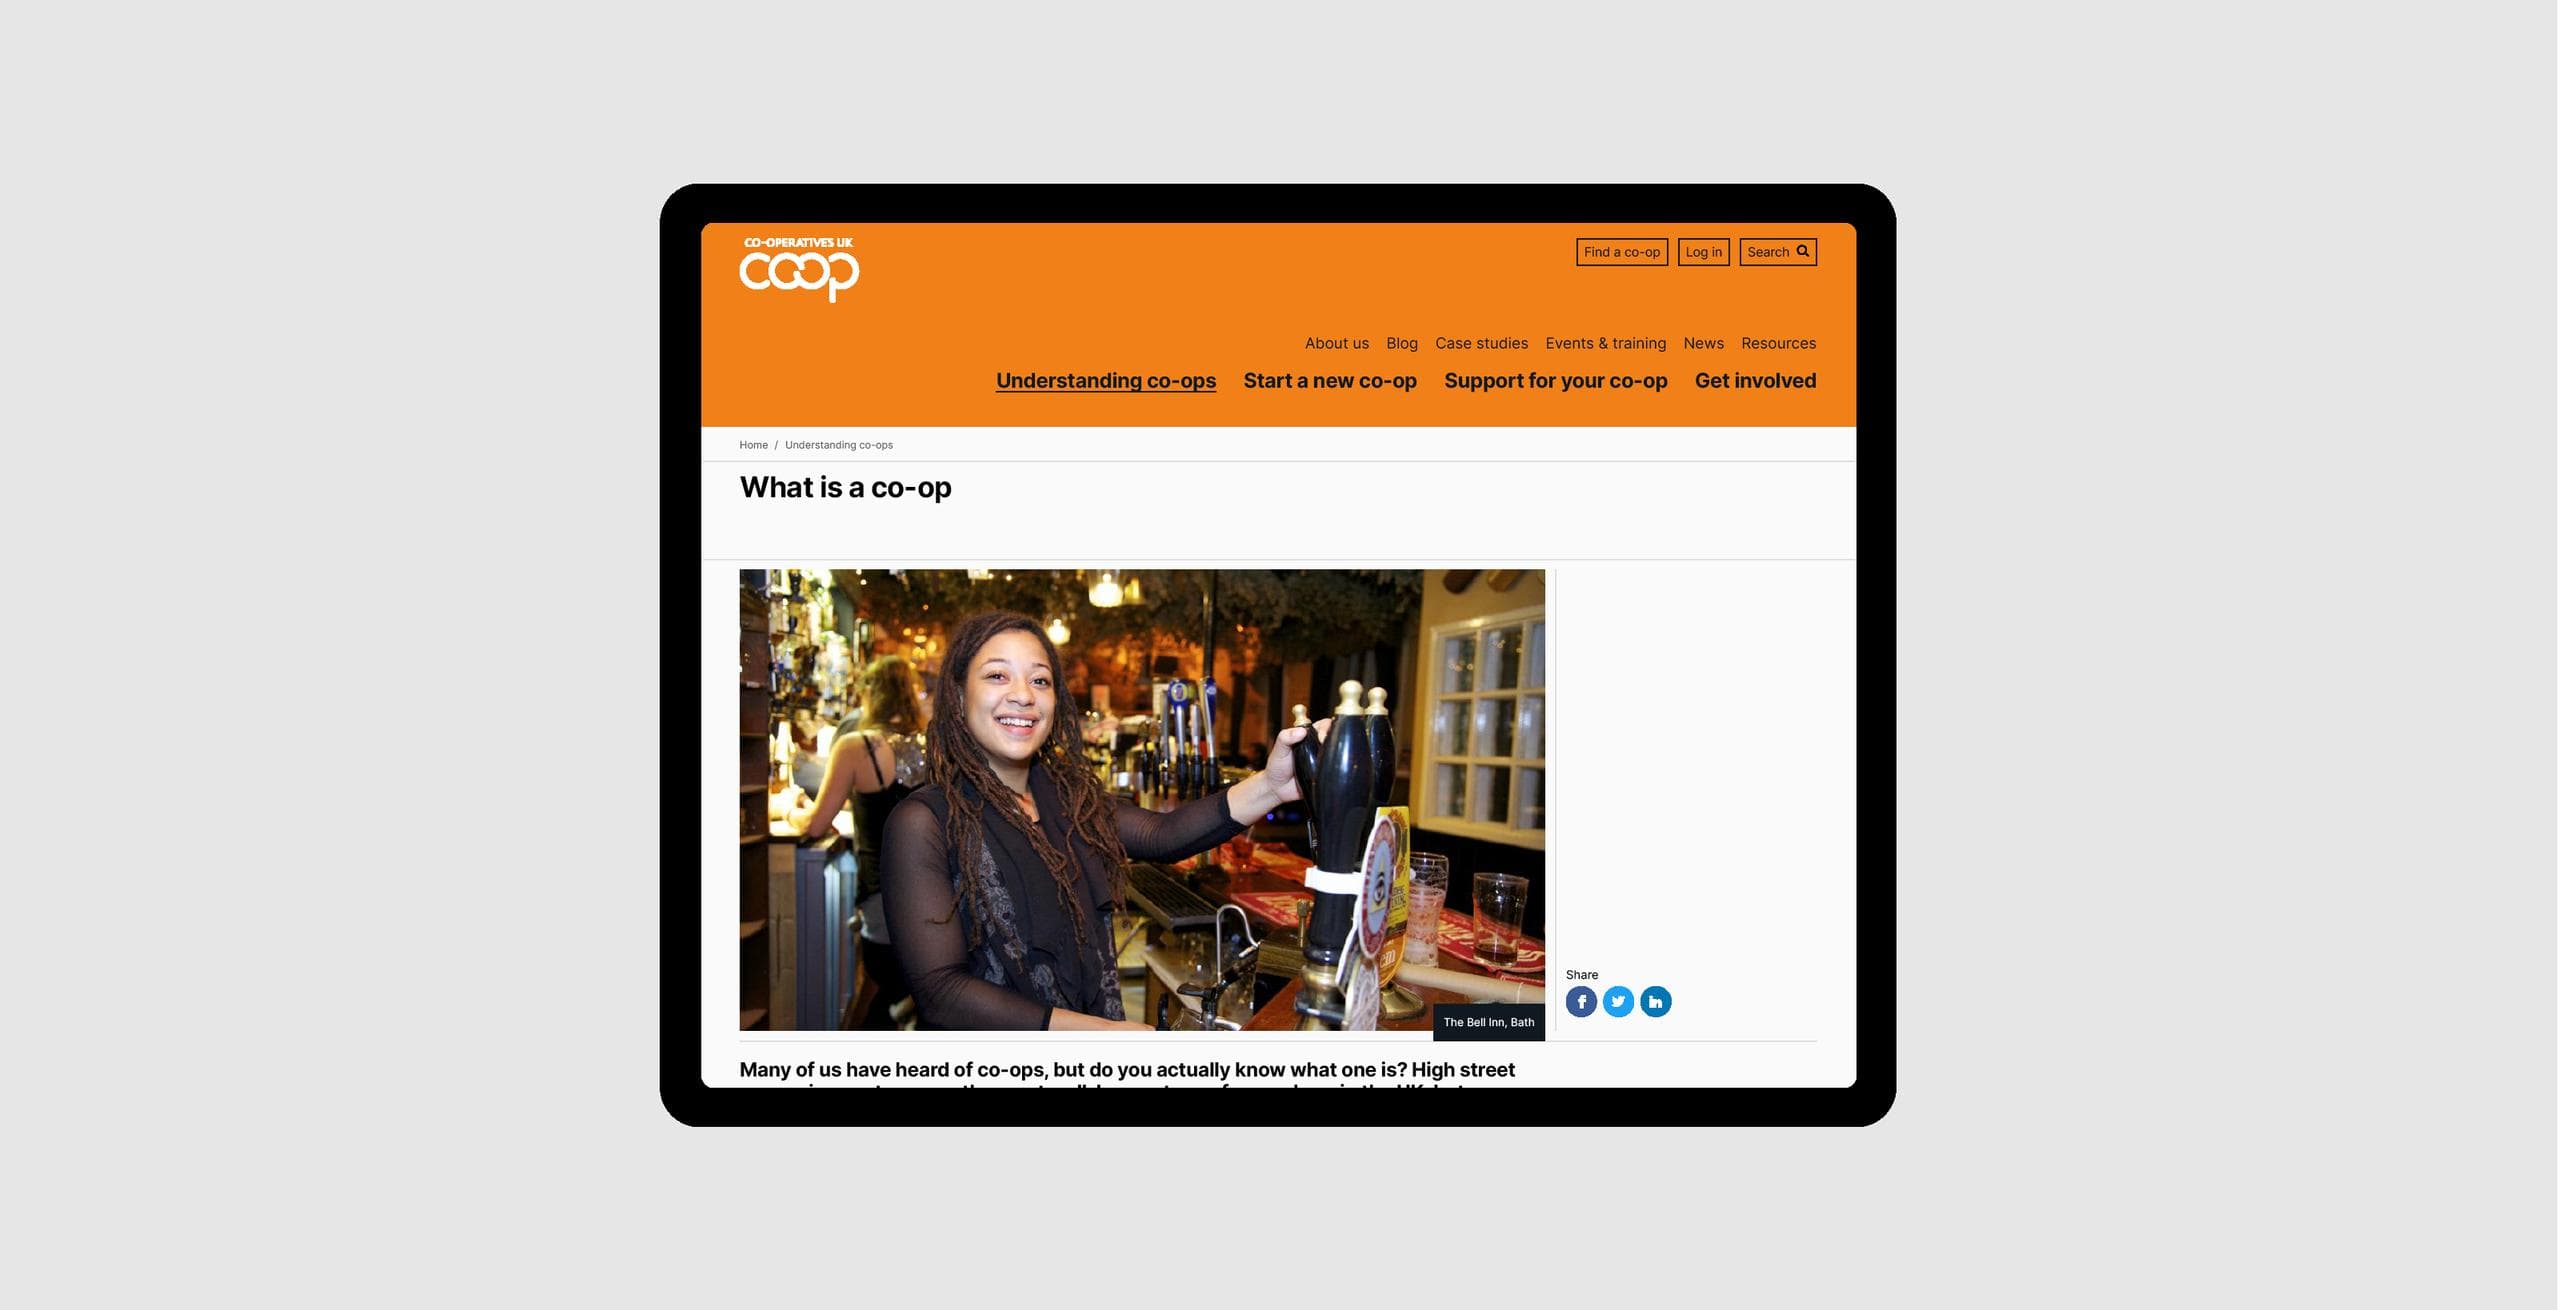 'What is a co-op' page